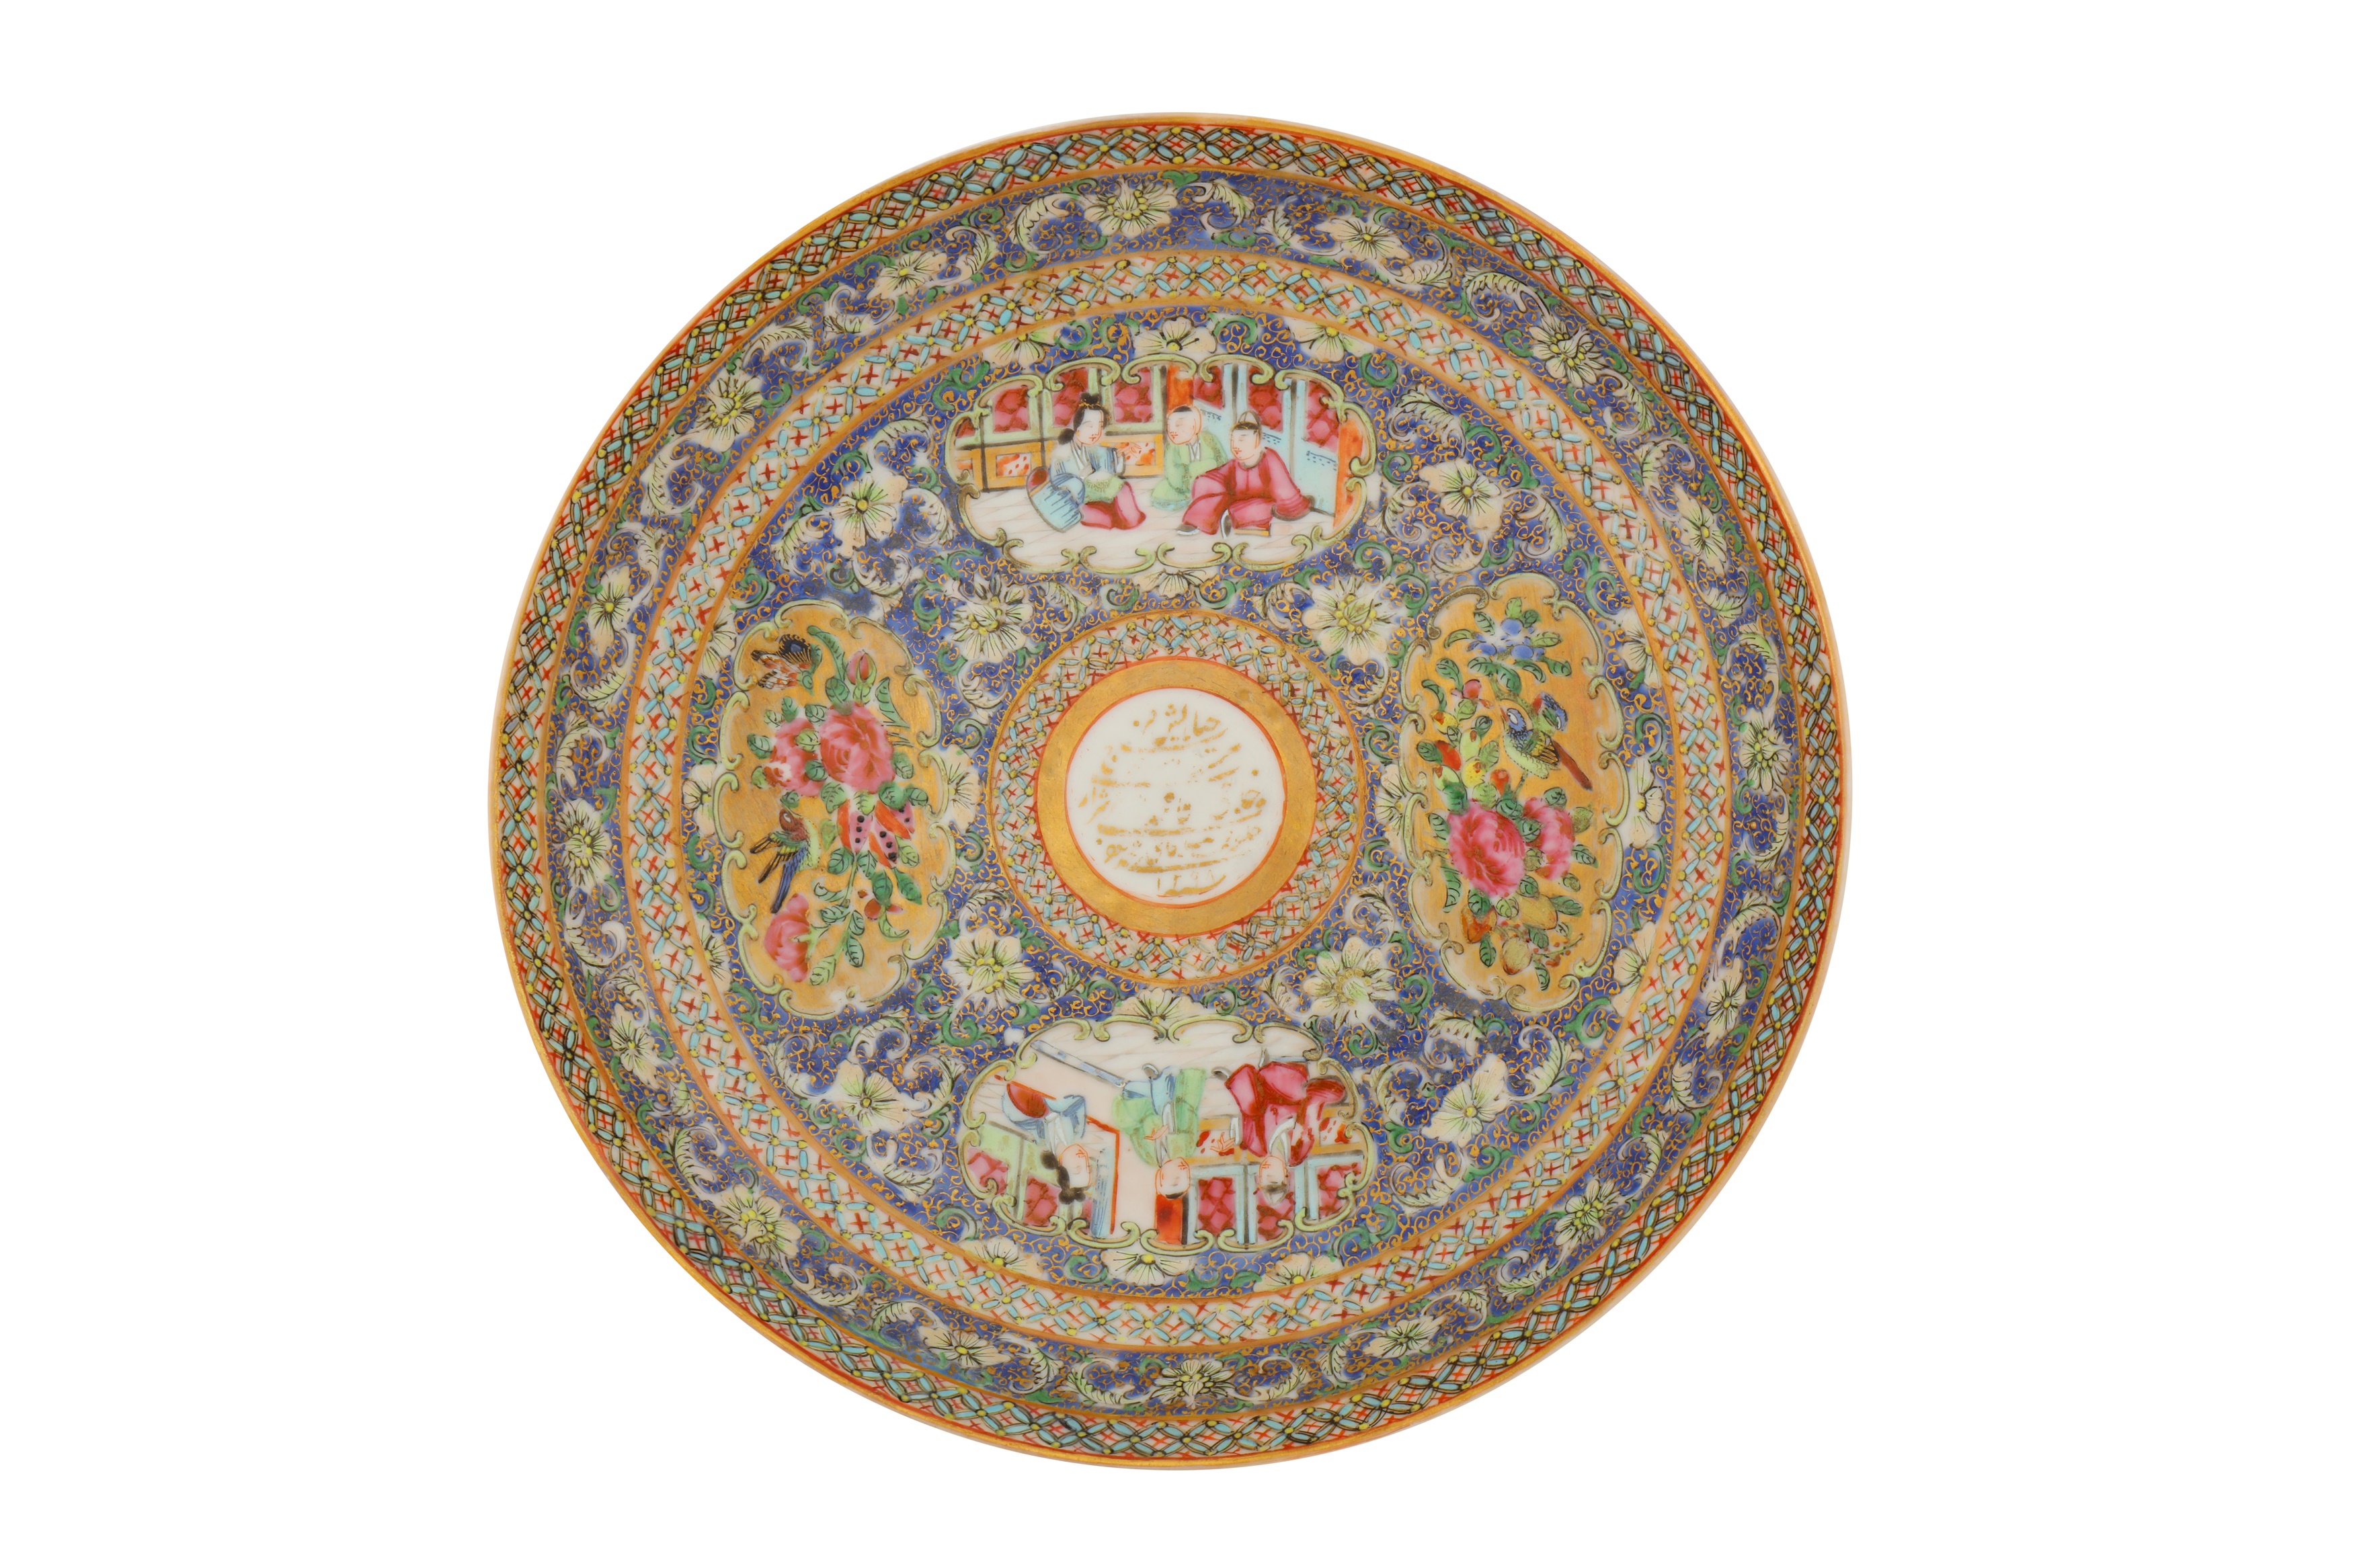 A MEDIUM-SIZED BOWL AND DISH AND SMALLER BOWL FROM THE ZILL AL-SULTAN CANTON PORCELAIN SERVICE - Image 15 of 17